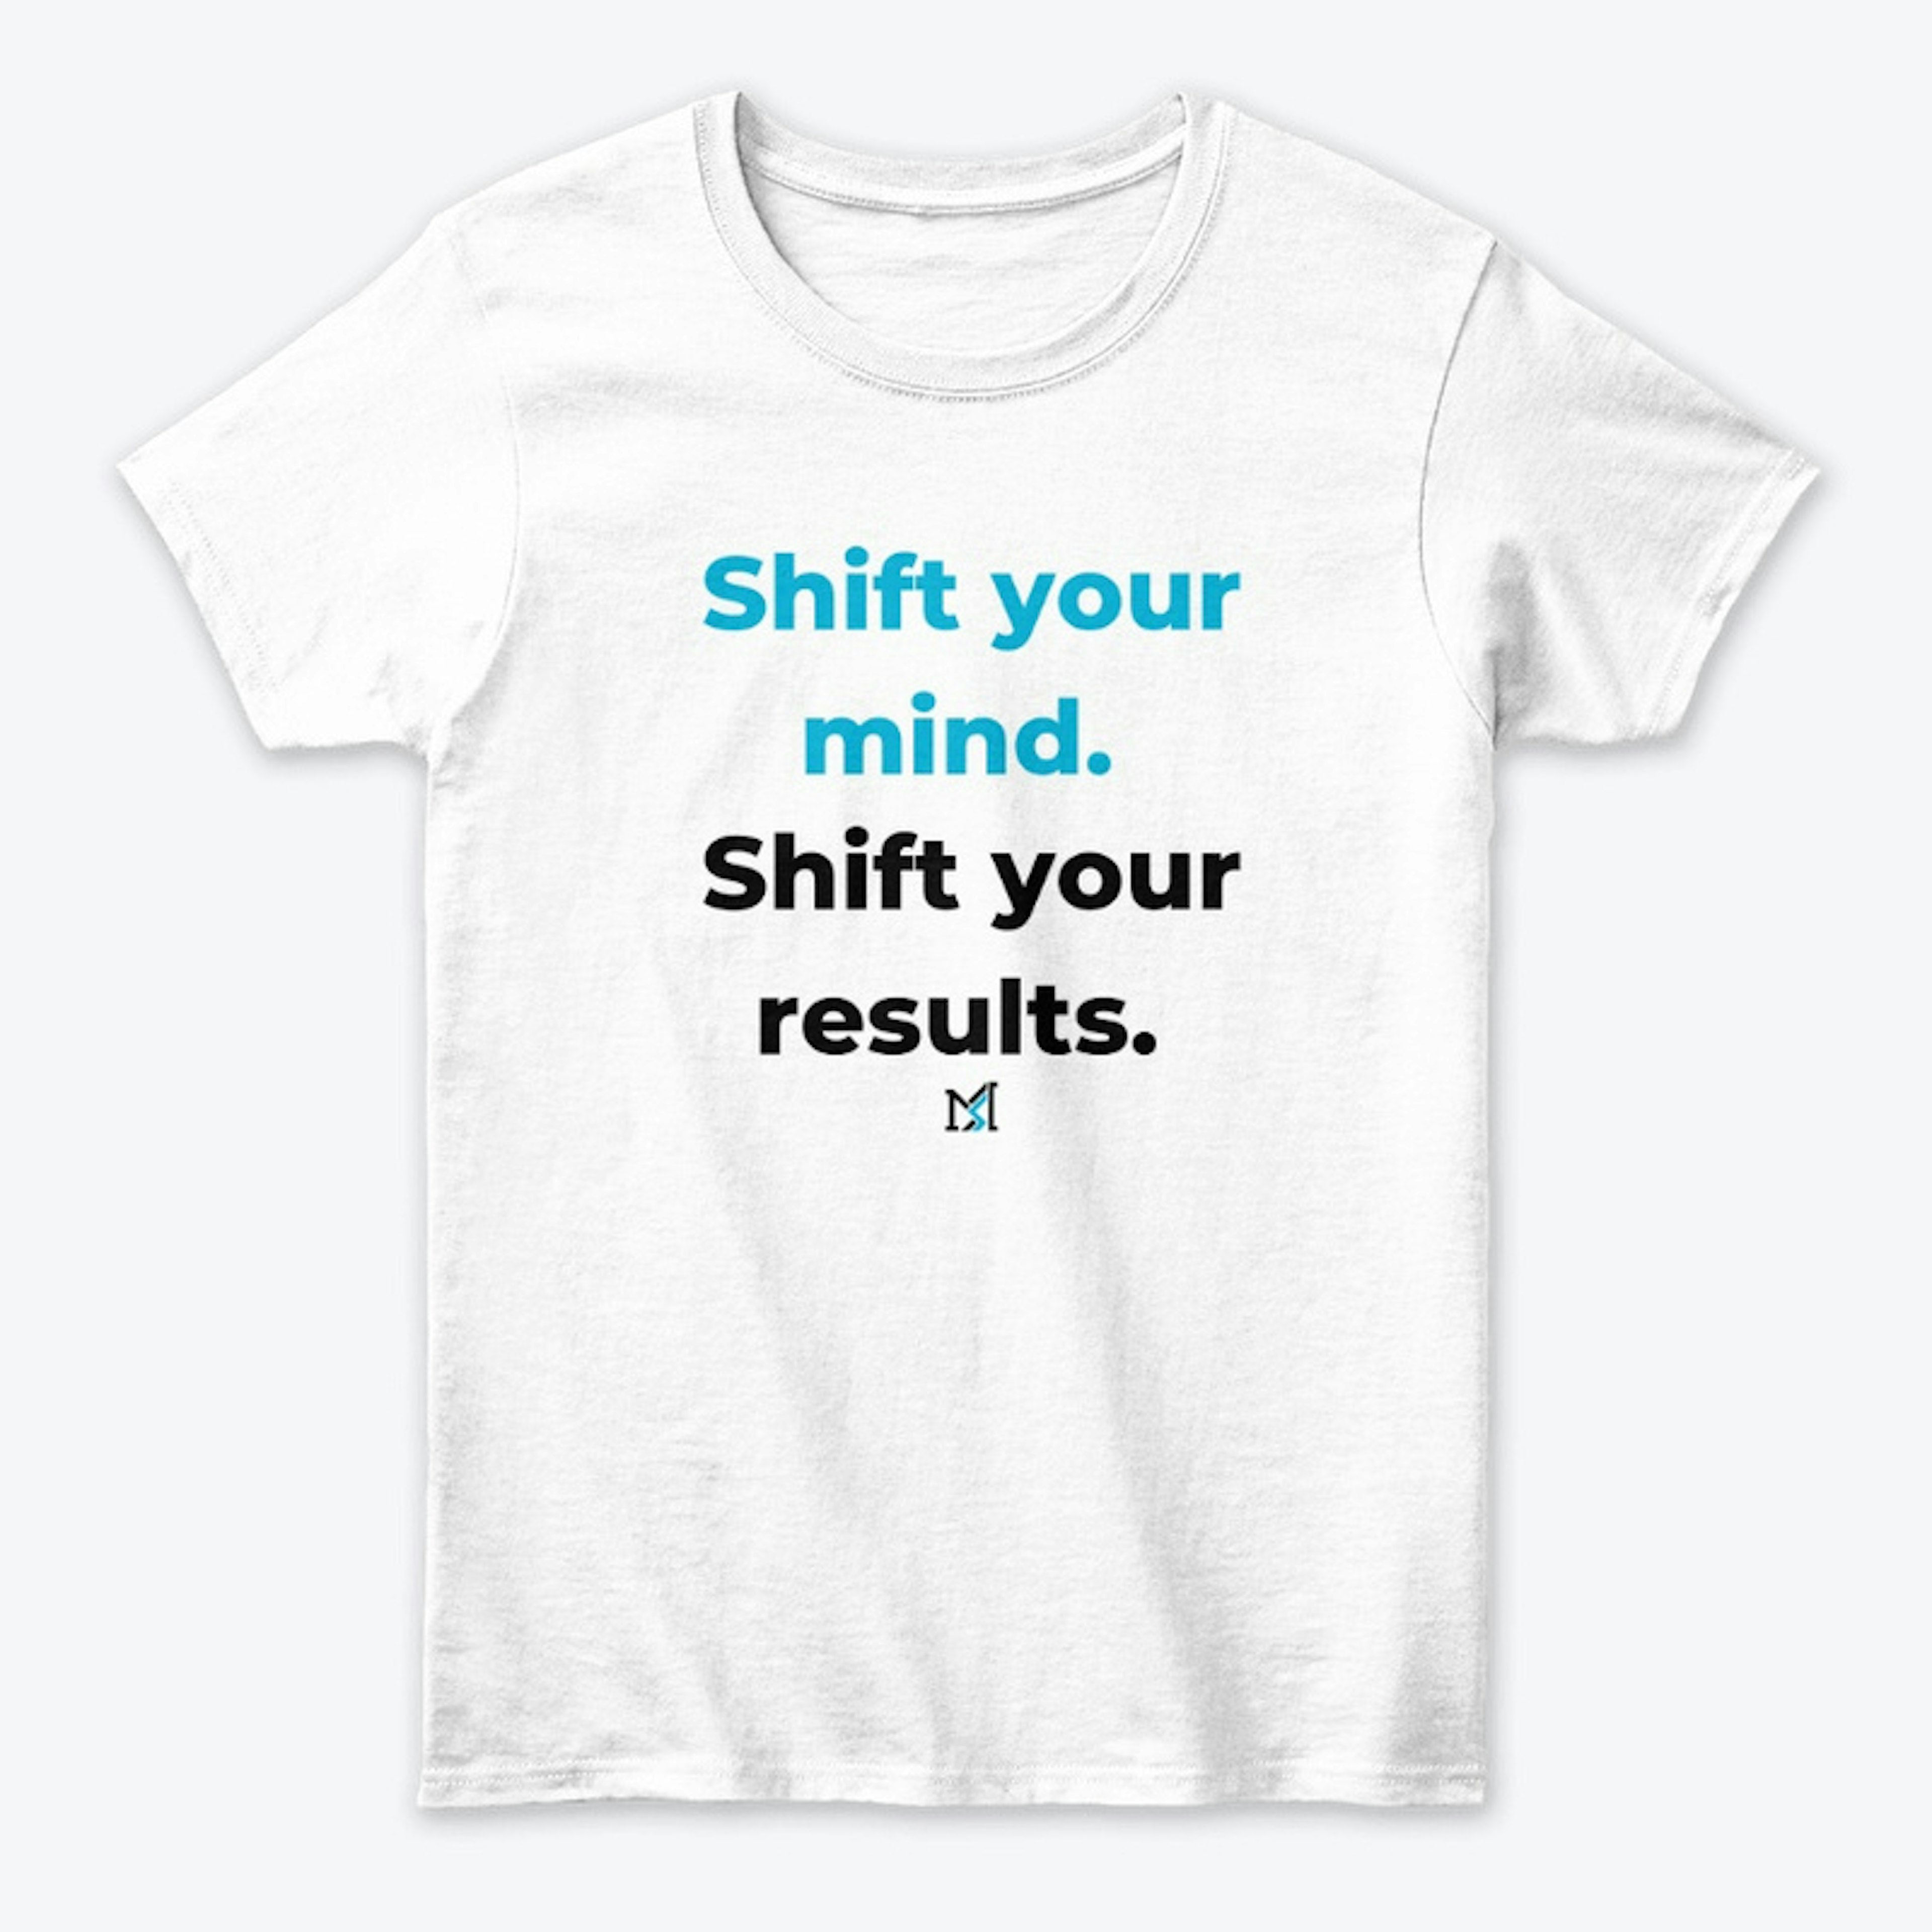 Shift your mind gear